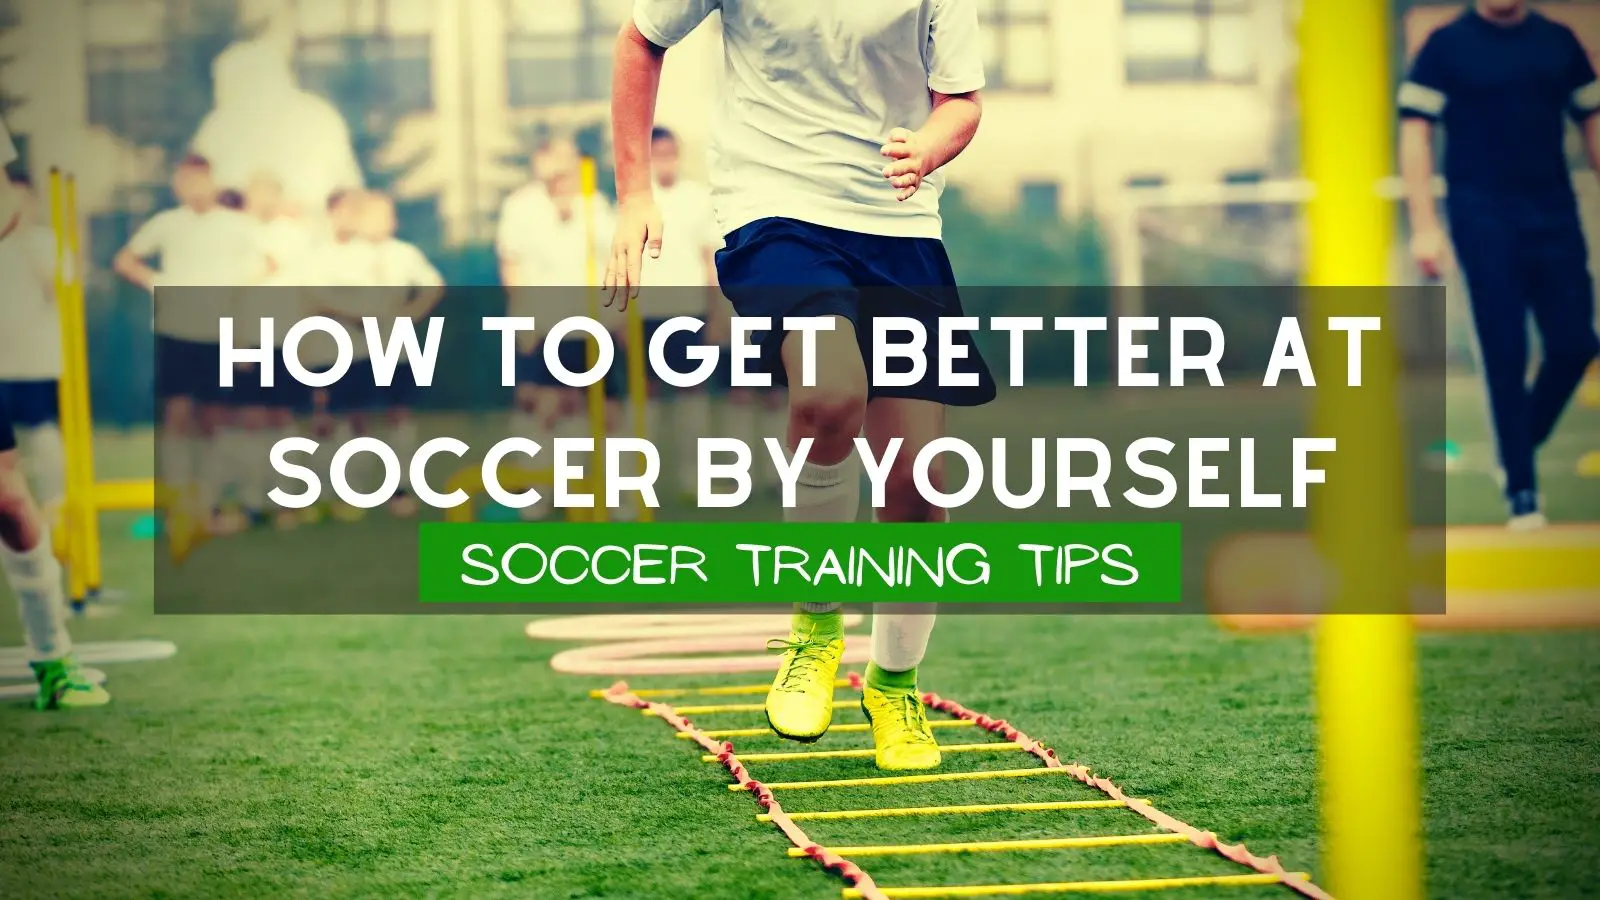 How To Get Better At Soccer By Yourself: Soccer Training Tips